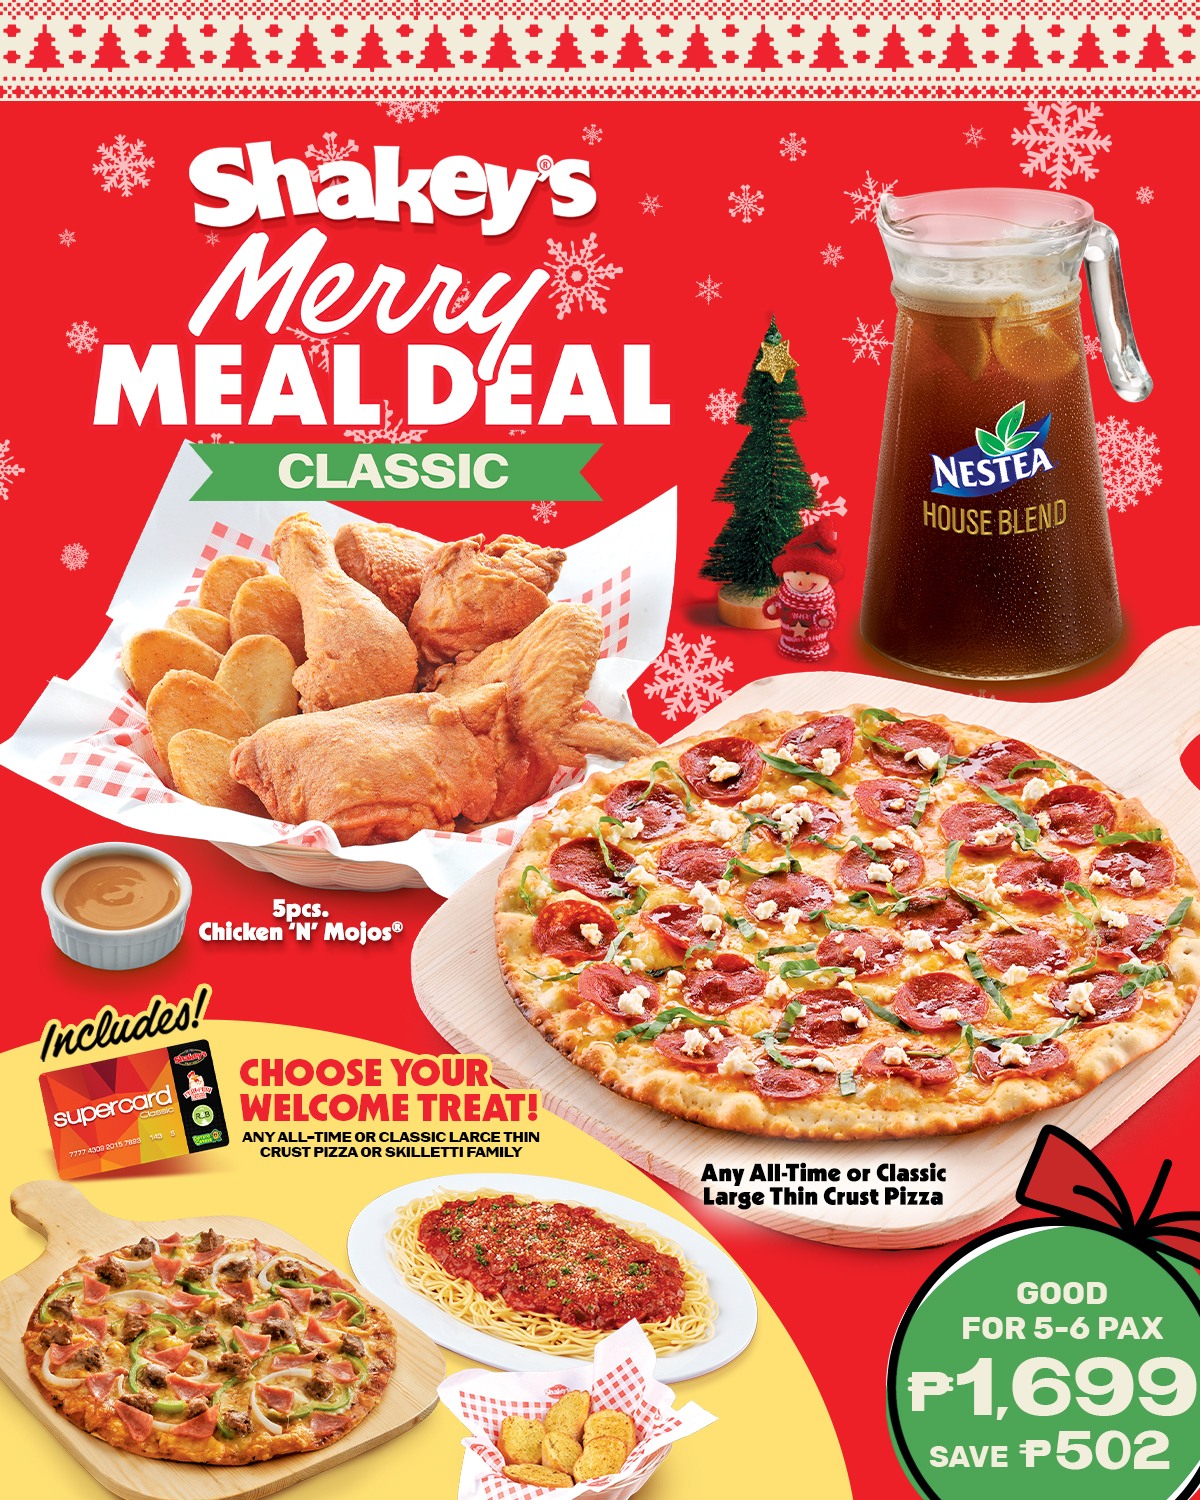 Shakey's Merry Meal Deal Classic Bundle